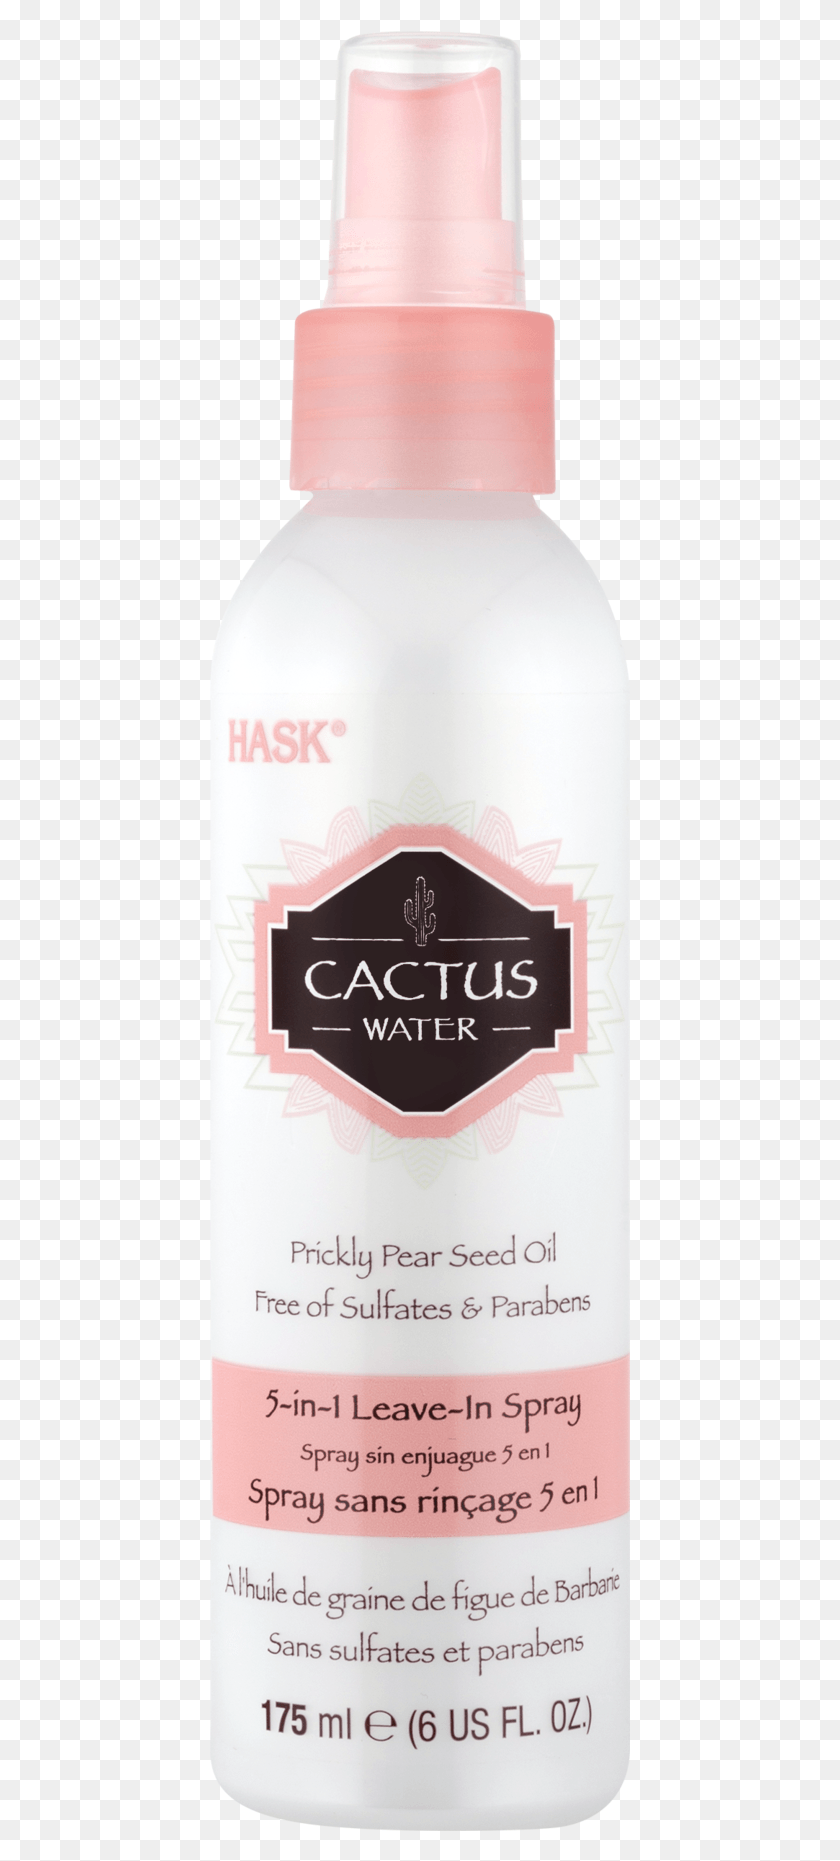 421x1801 Hask Cactus Water 5 In 1 Leave In Spray With Prickly, Этикетка, Текст, Бутылка Hd Png Скачать